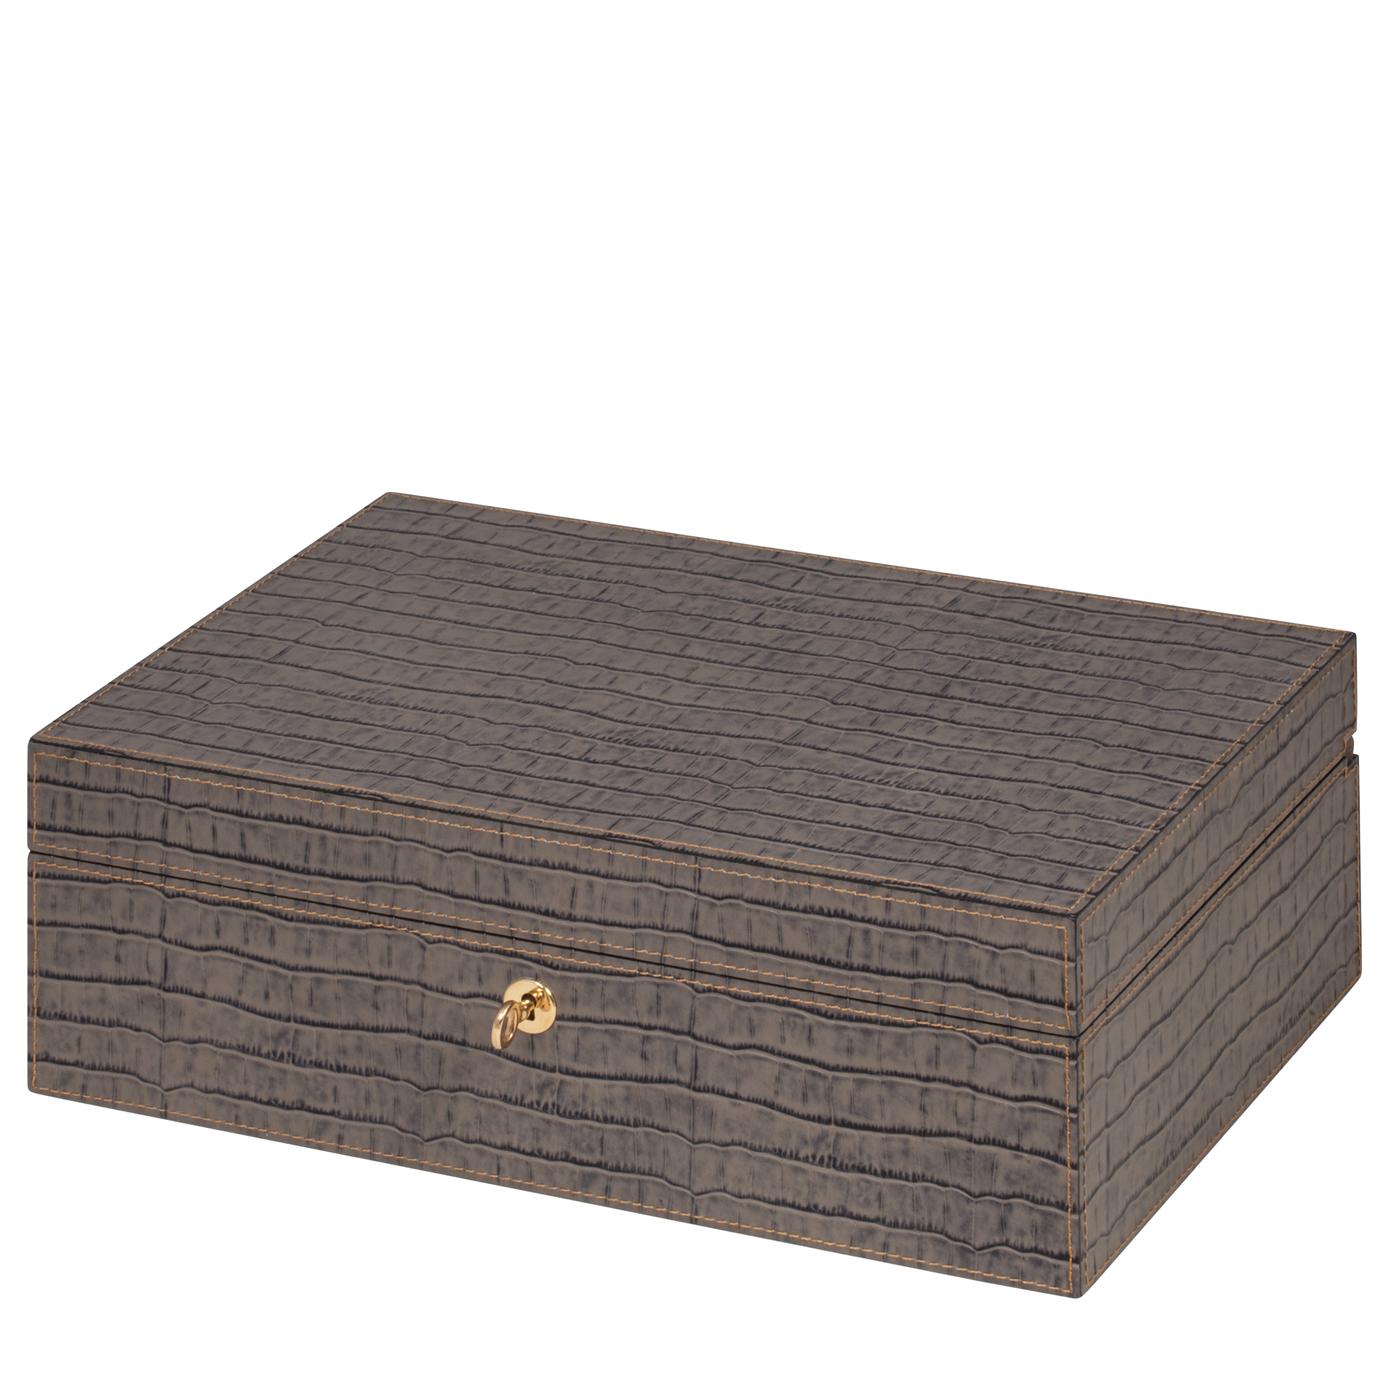 This superb humidor is a perfect gift or precious companion for the cigar lover. The walnut wood case is externally covered with fine leather that can be customized in color and texture. Inside, a cedar wood lining insures a perfect internal